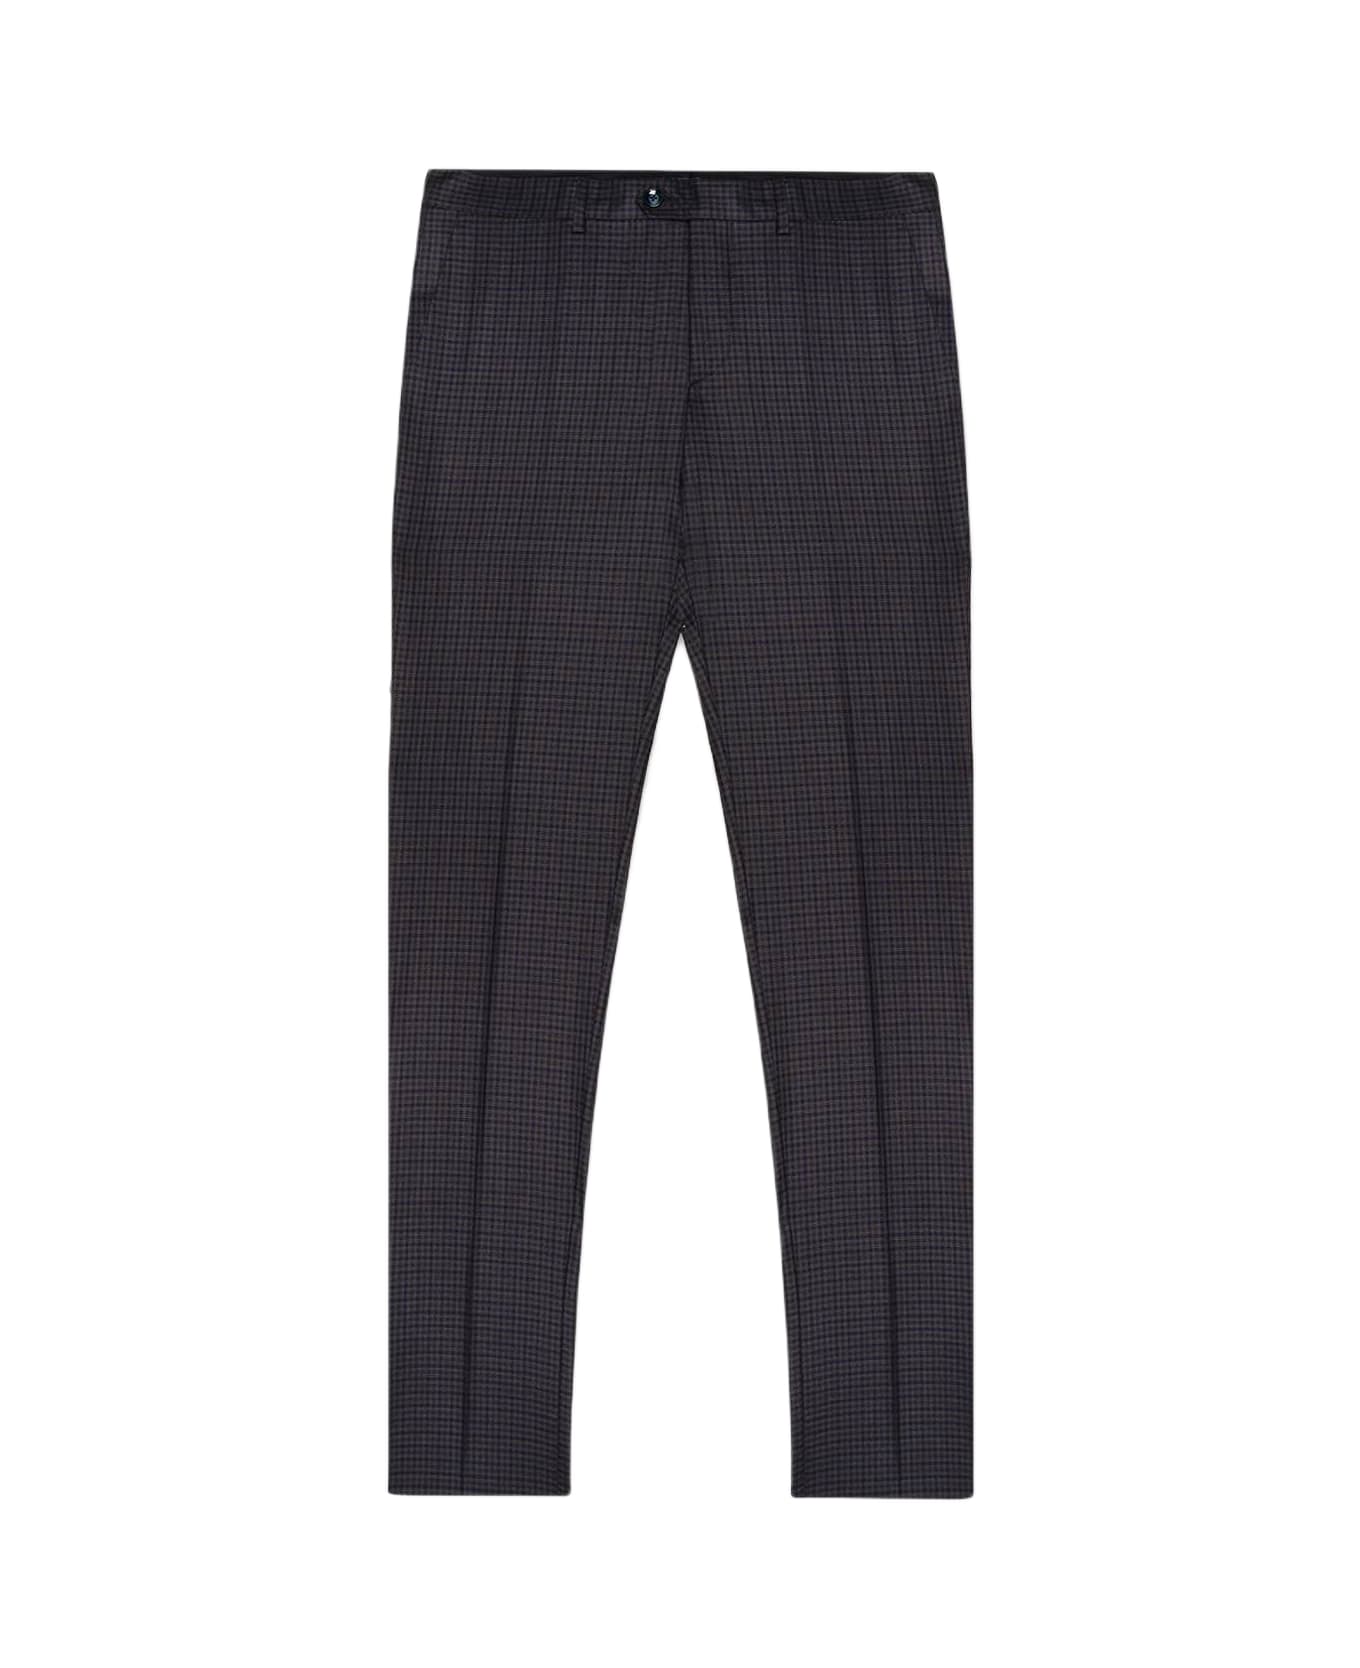 Larusmiani Trousers 'checked' Pants - Dark Blue Check